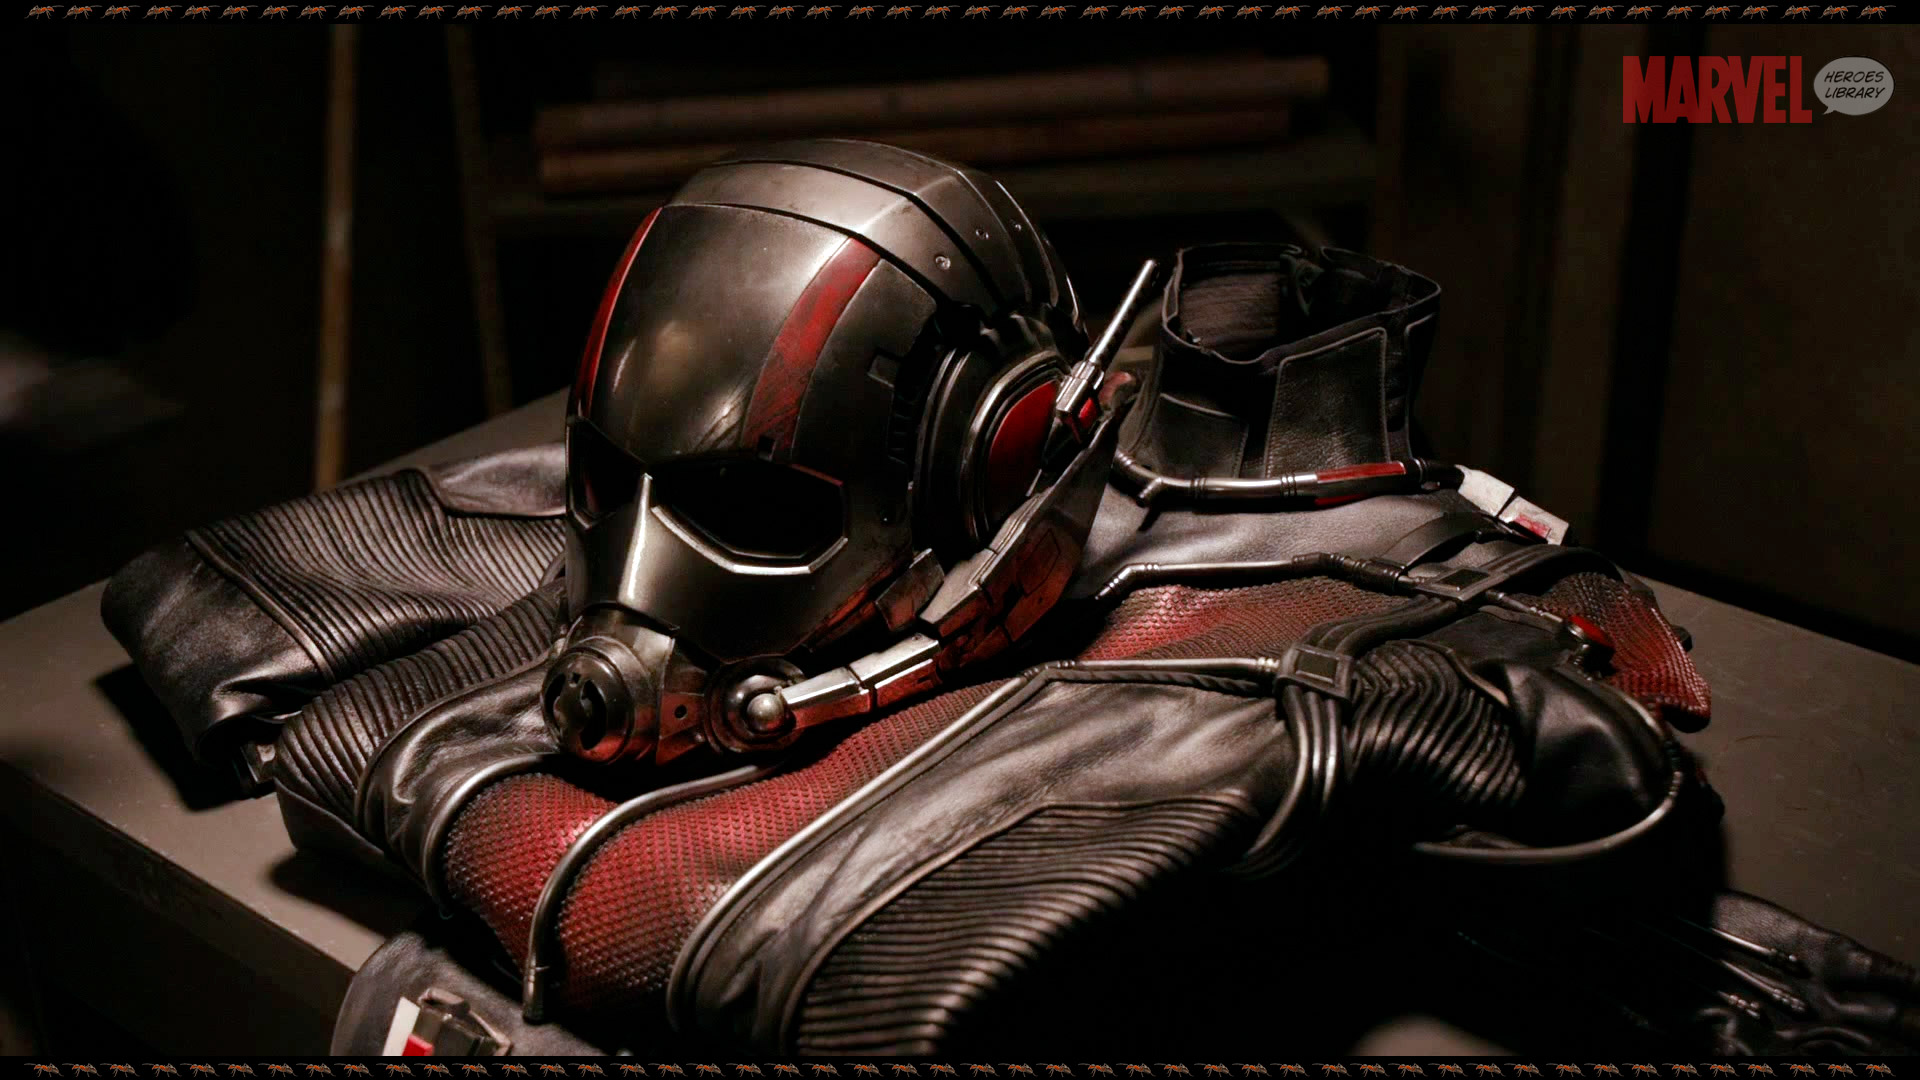 Old Motorcycle Suit (Ant-Man) HD Wallpaper